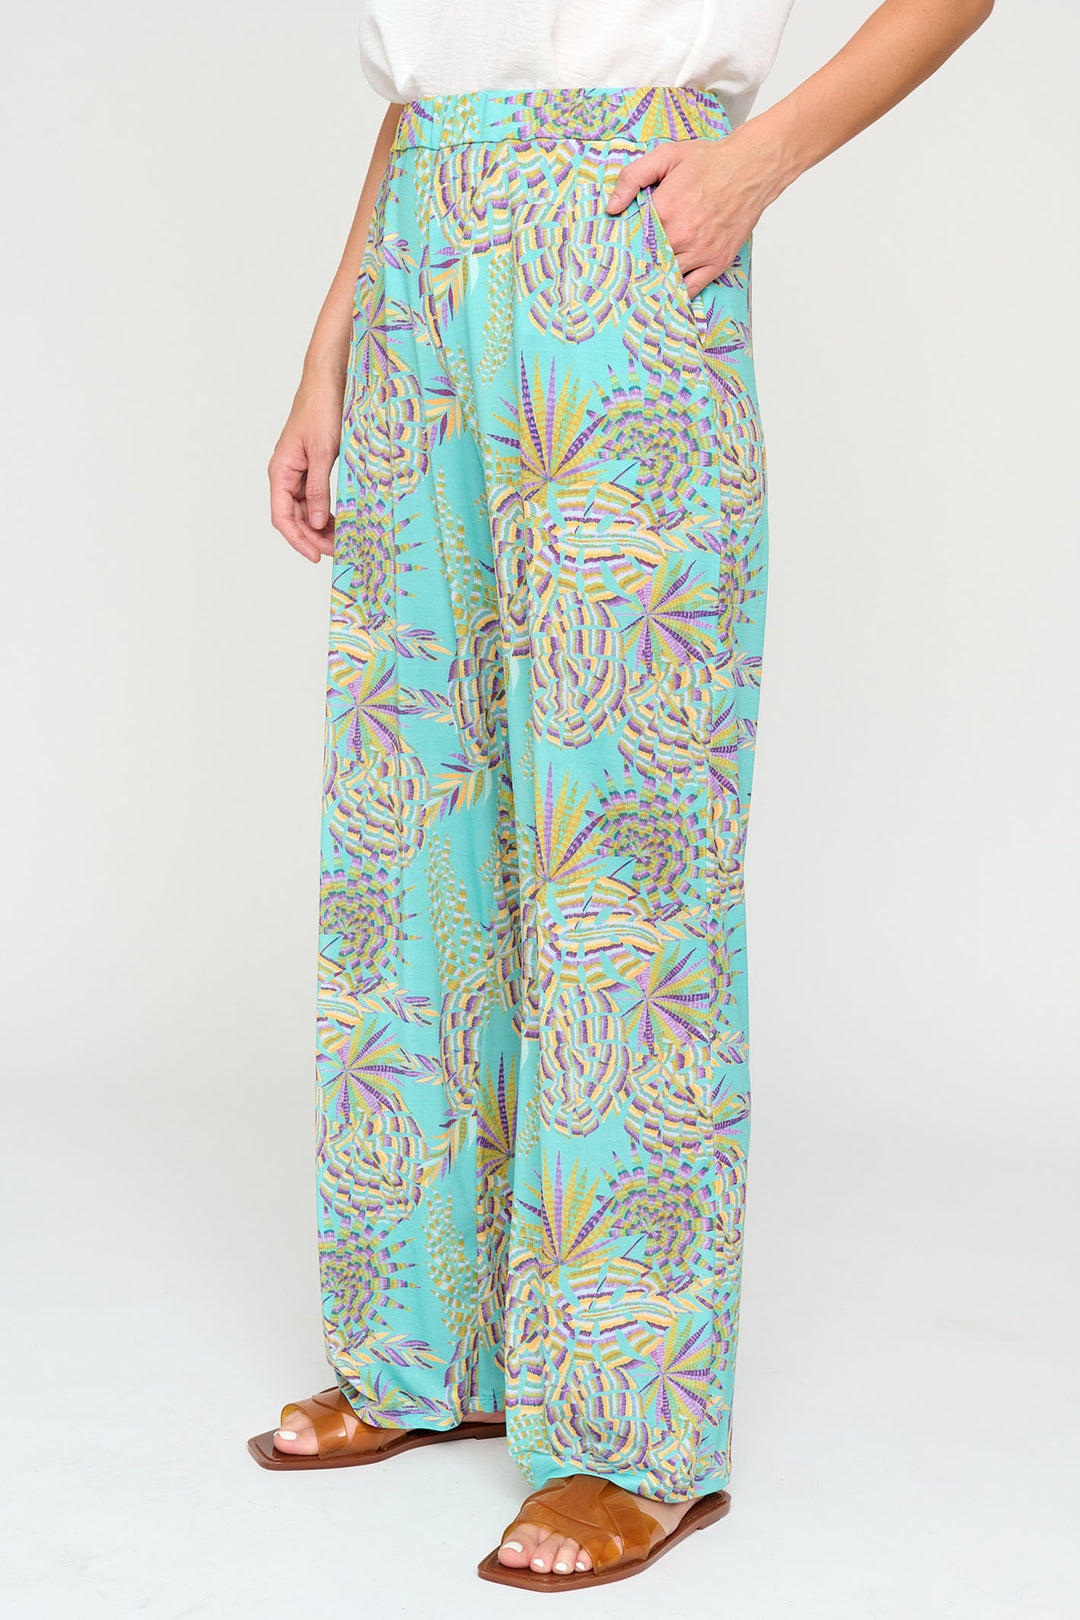 Tinta Bedelia Mint Green Print Loose Fit Pull-On Trousers - Rouge Boutique Inverness